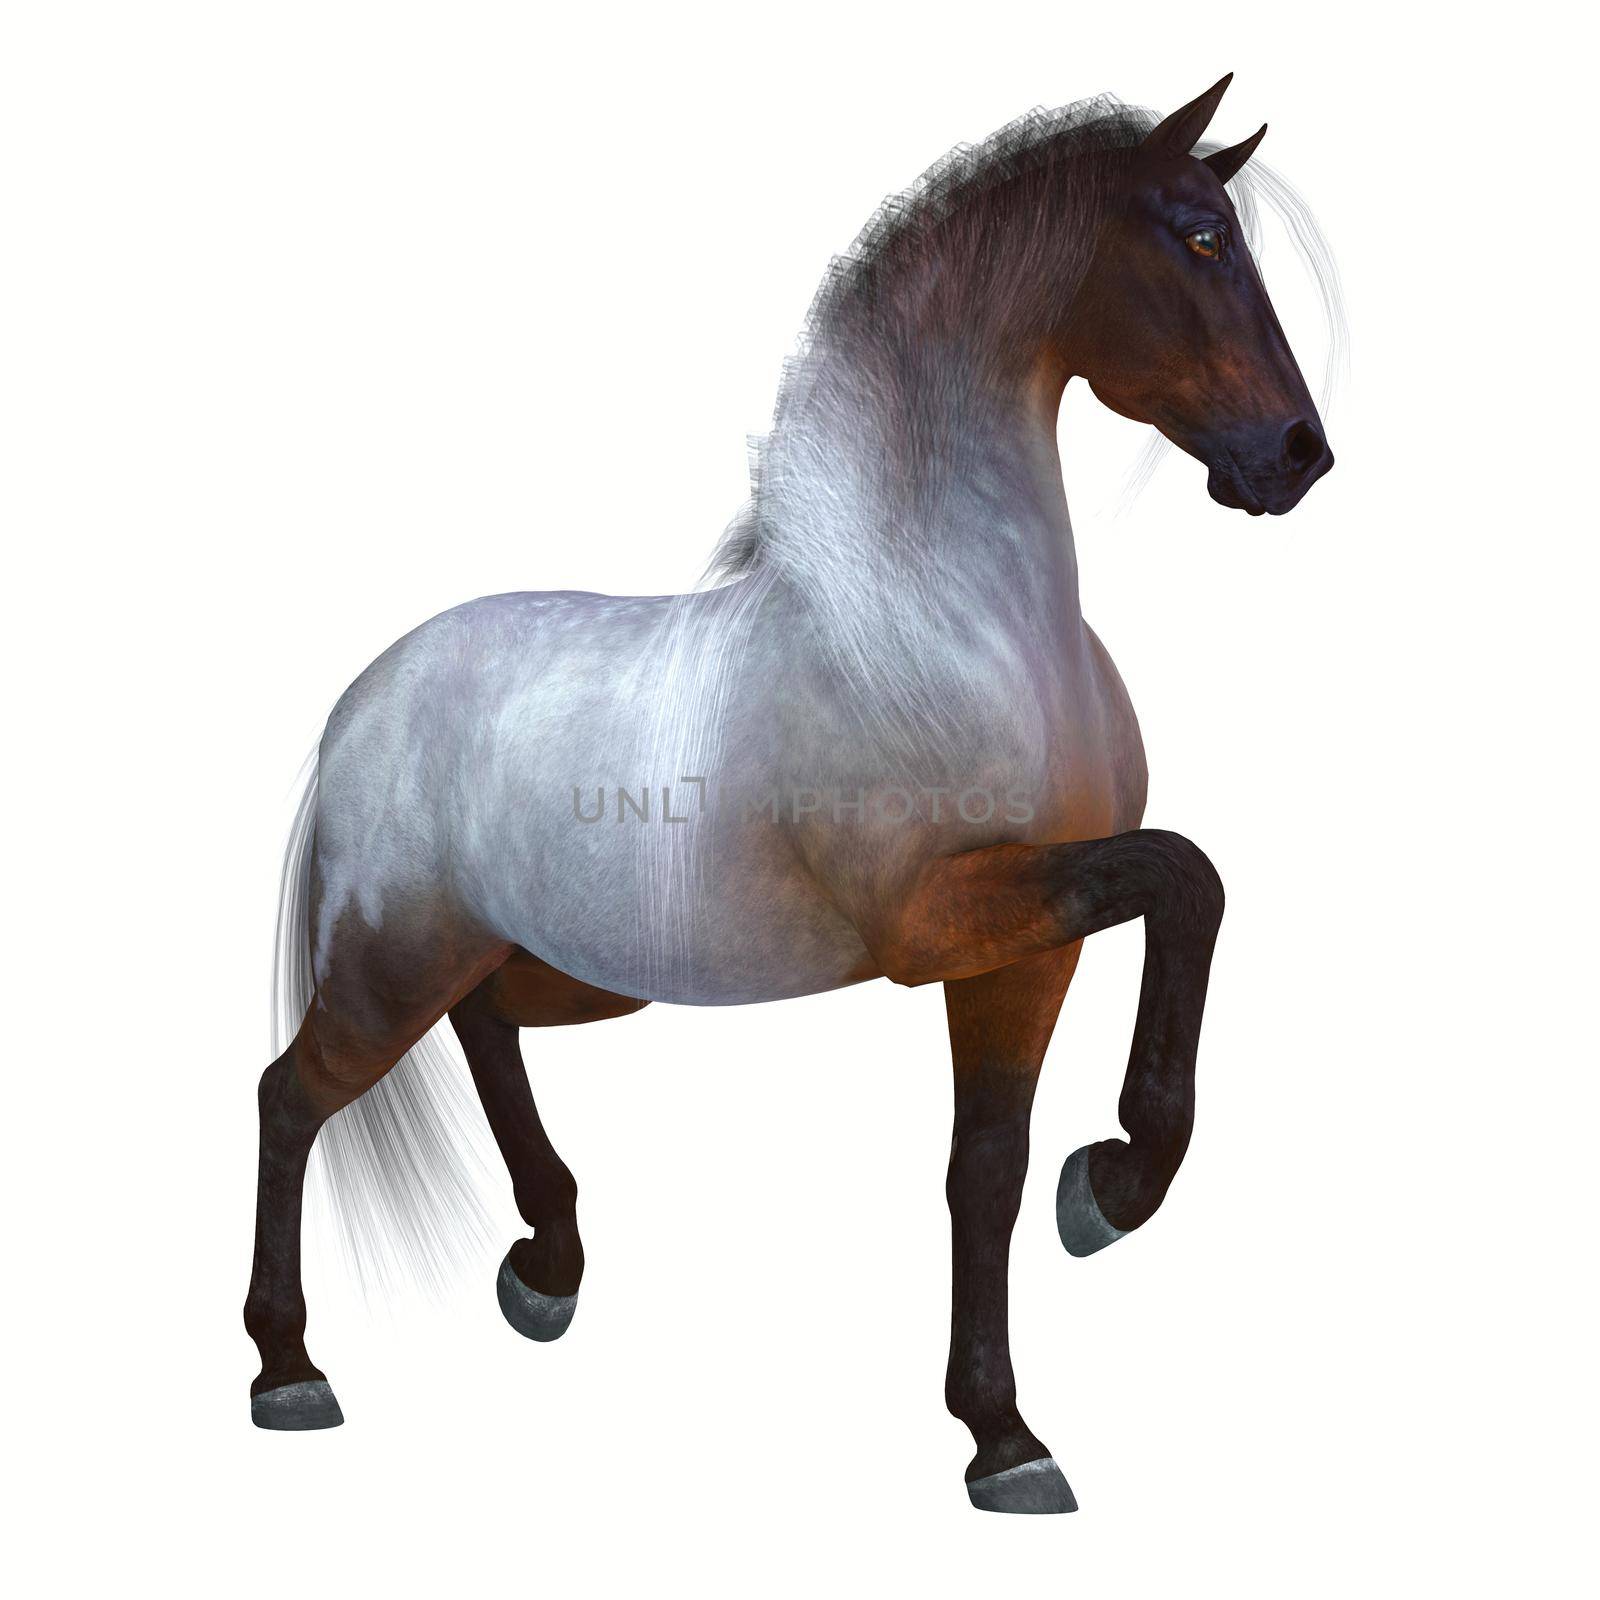 The Bay Roan is a coat color of many different breeds of horses and is distinguished by a base Bay color.